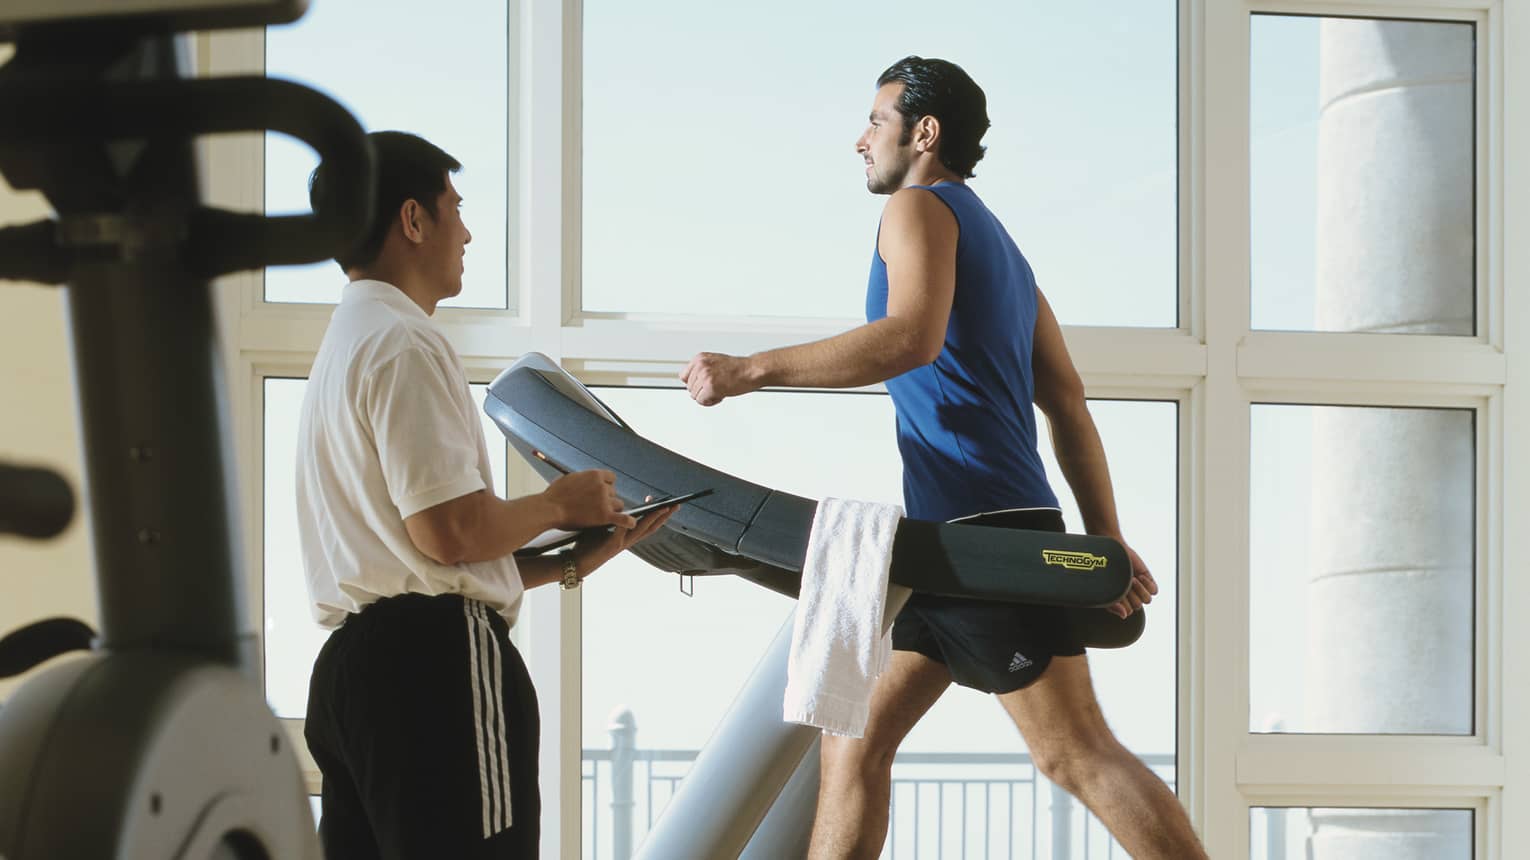 Man in workout gear on treadmill as personal trainer looks on